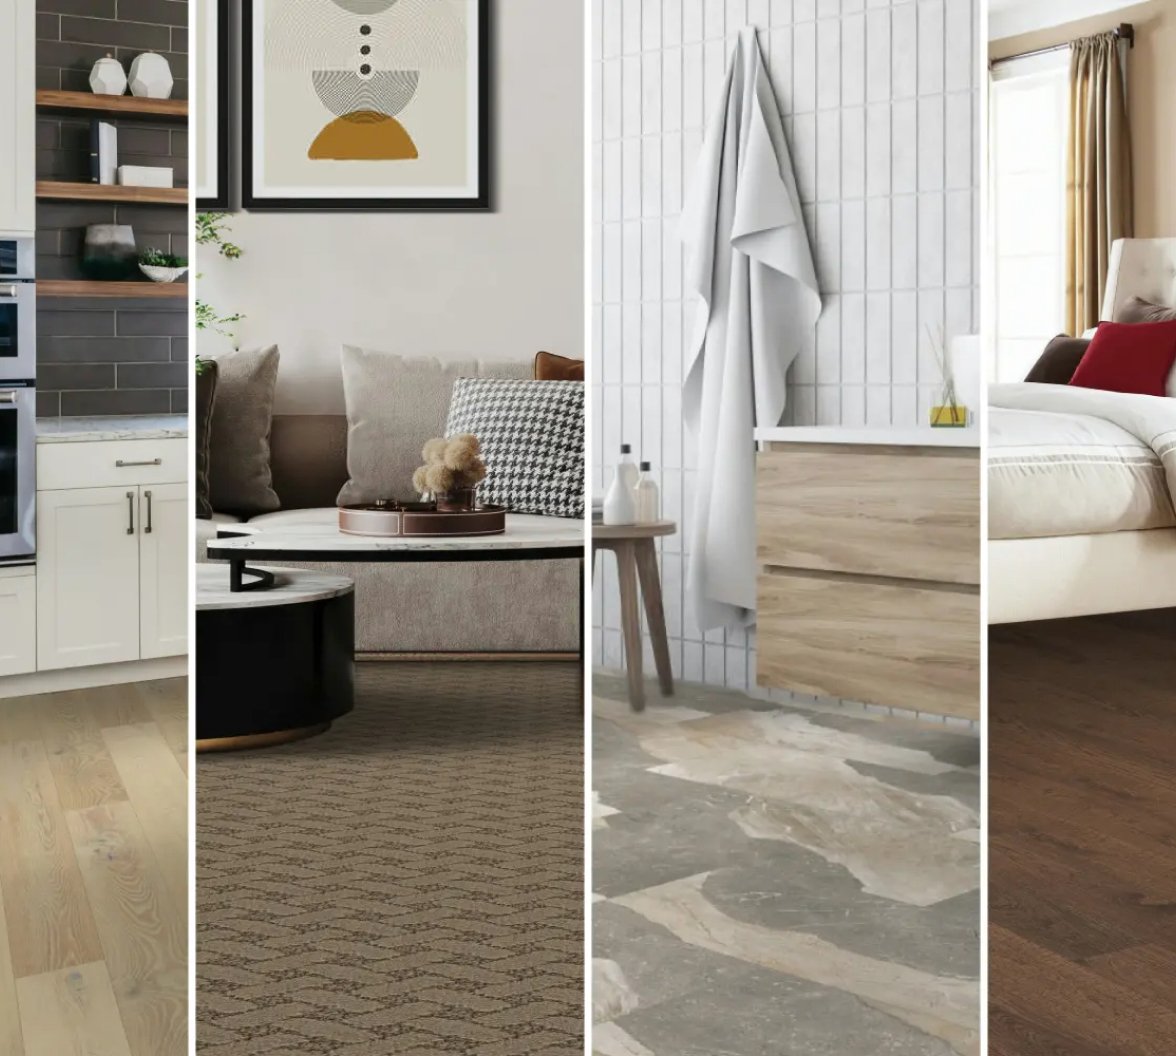 Flooring options for realtor clients